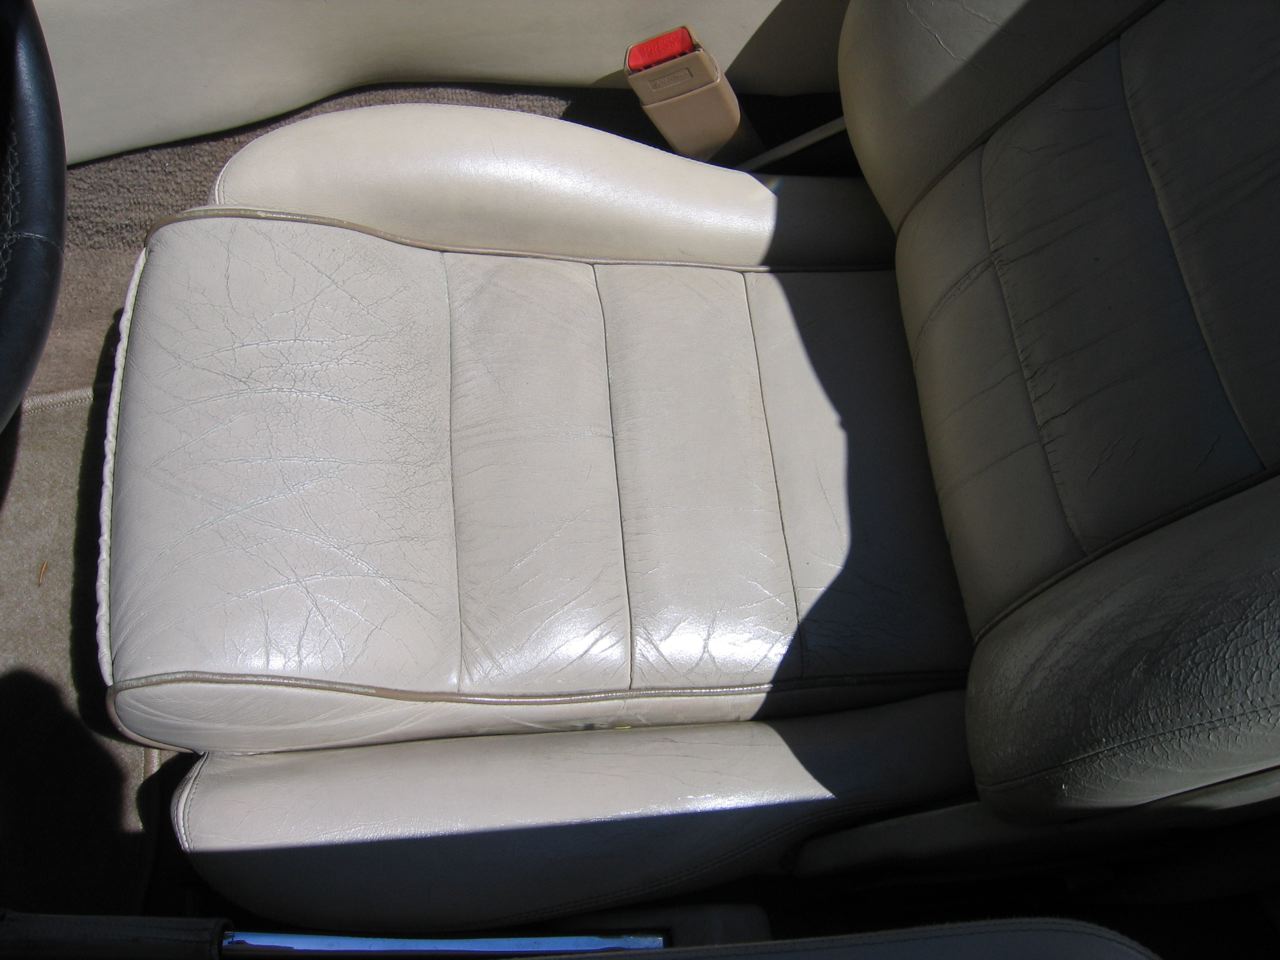 XJS Seats to Restore or Reupholster ?